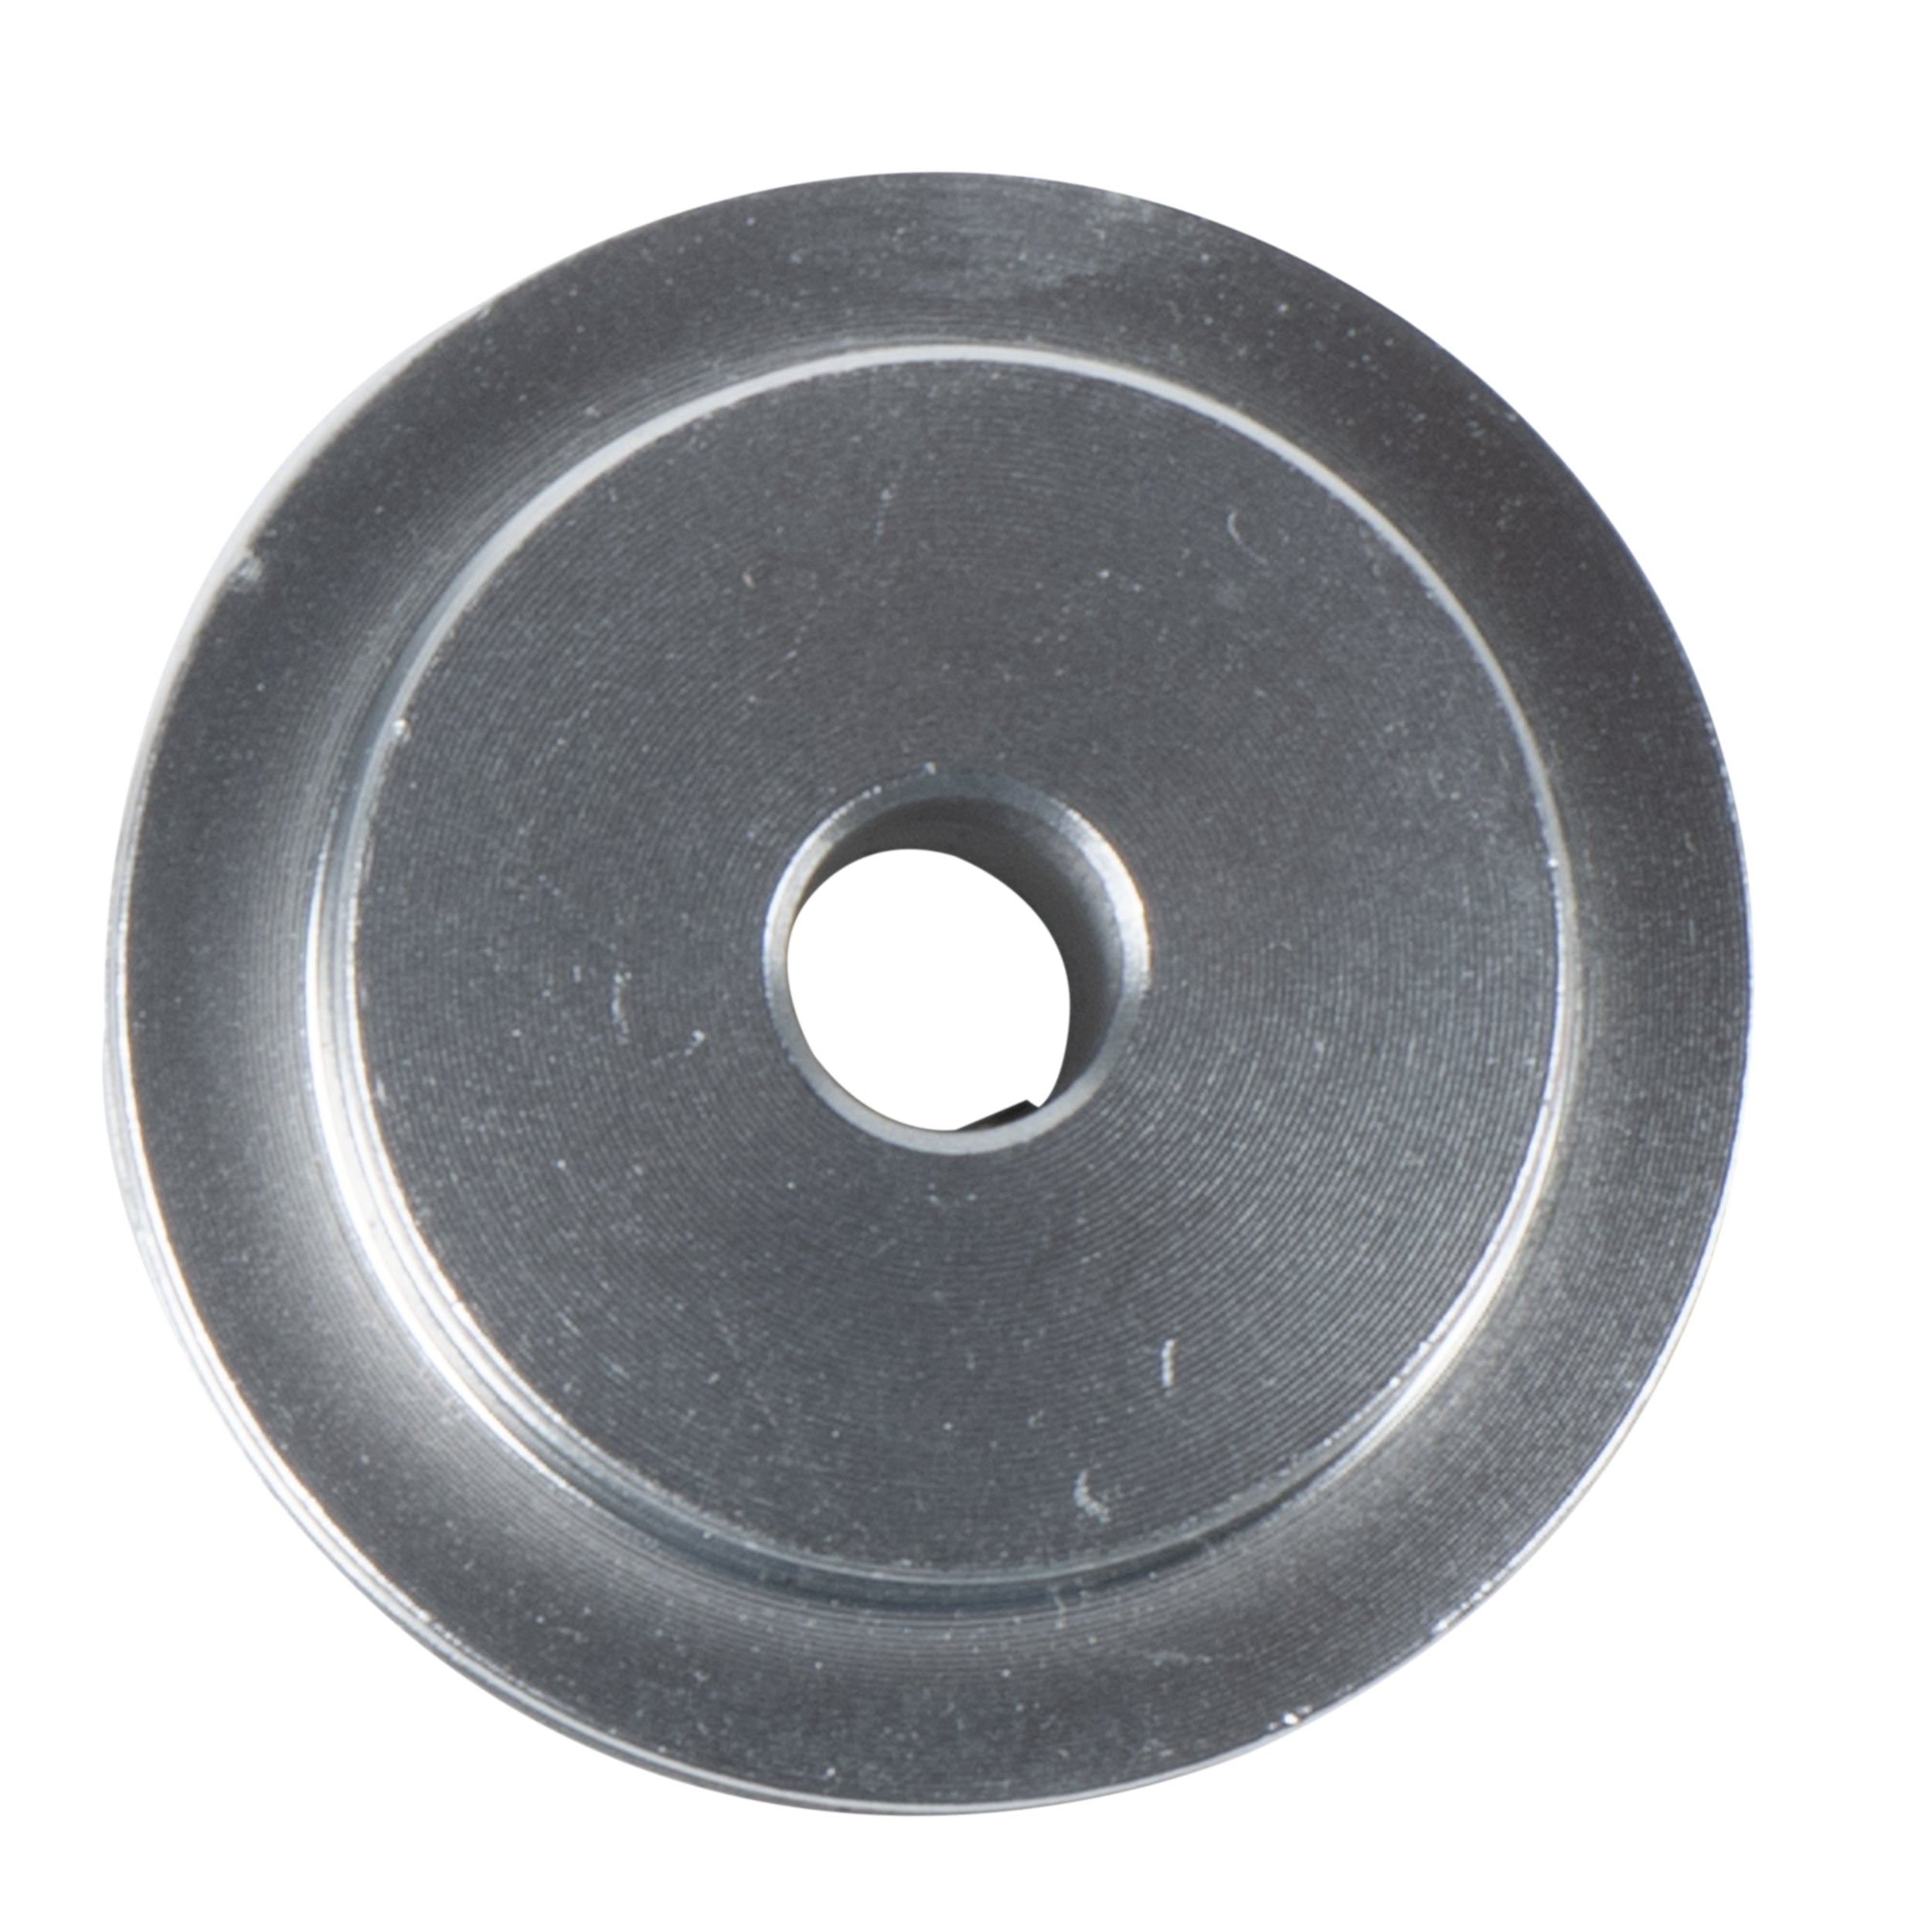 RBS PRO G2 Small Pulley for Drying Motor